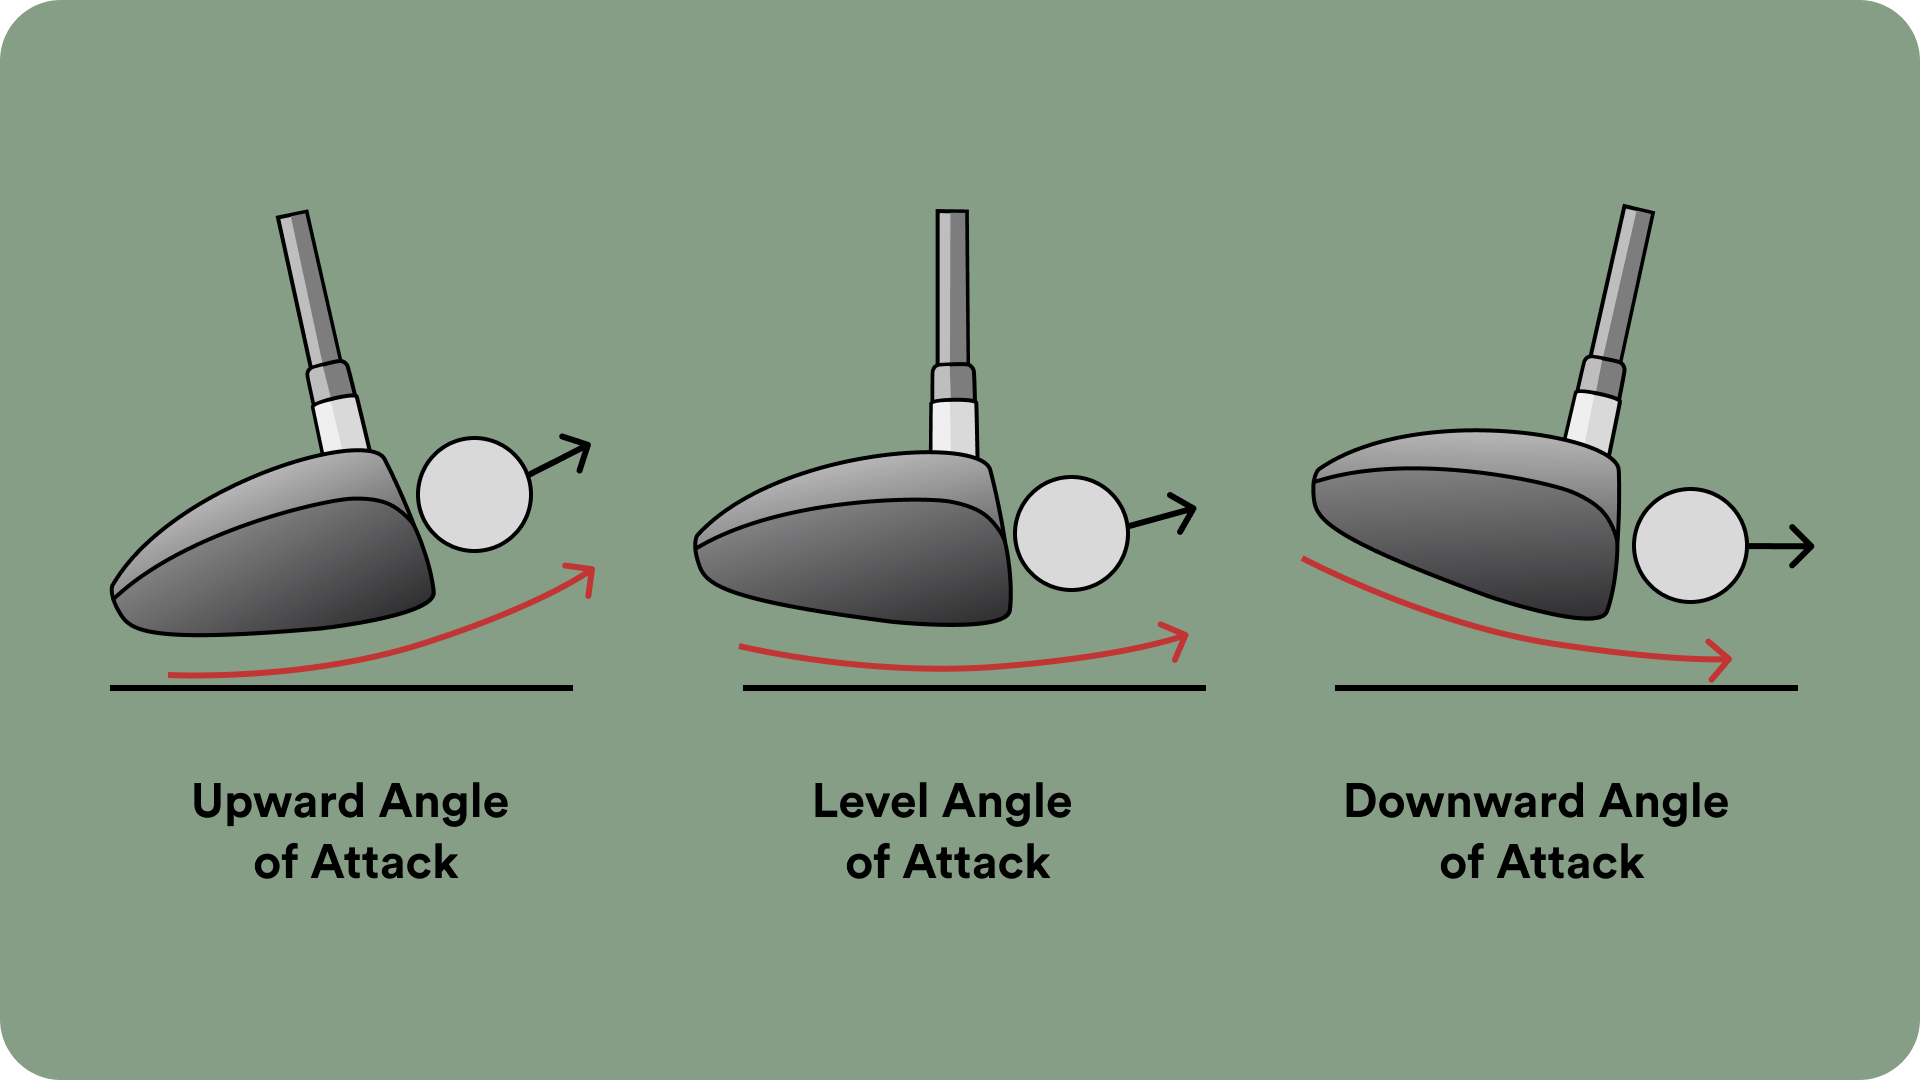 Graphic showing an upward angle of attack, a level angle of attack, and a downward angle of attack. In each image, the driver comes toward the ball at a different angle and there are arrows showing the direction of ball flight